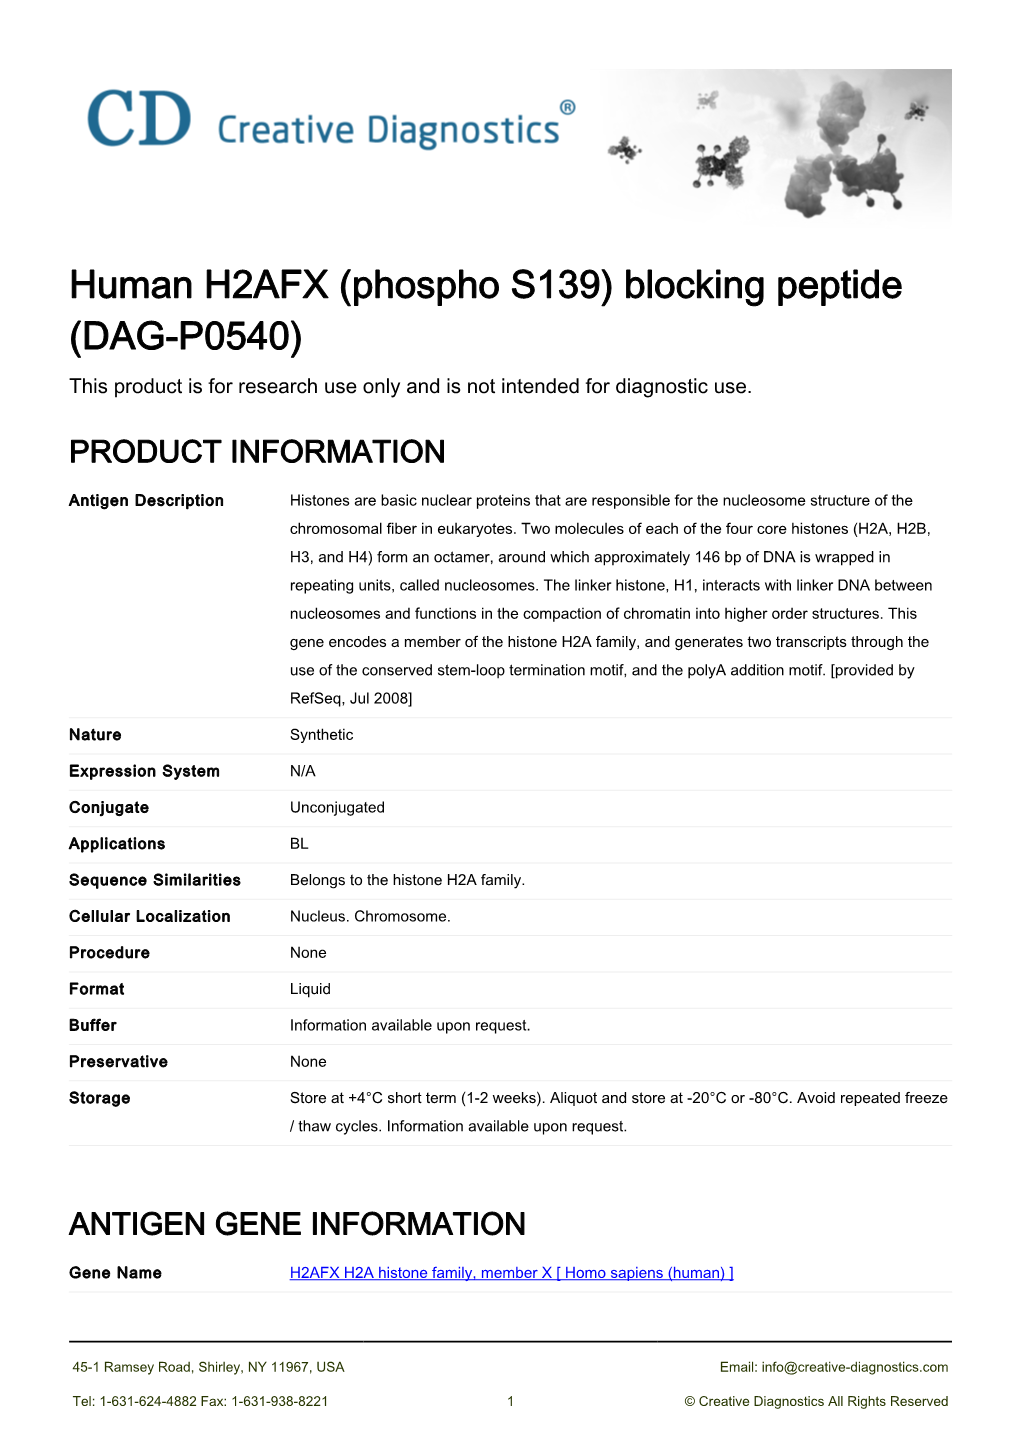 Human H2AFX (Phospho S139) Blocking Peptide (DAG-P0540) This Product Is for Research Use Only and Is Not Intended for Diagnostic Use